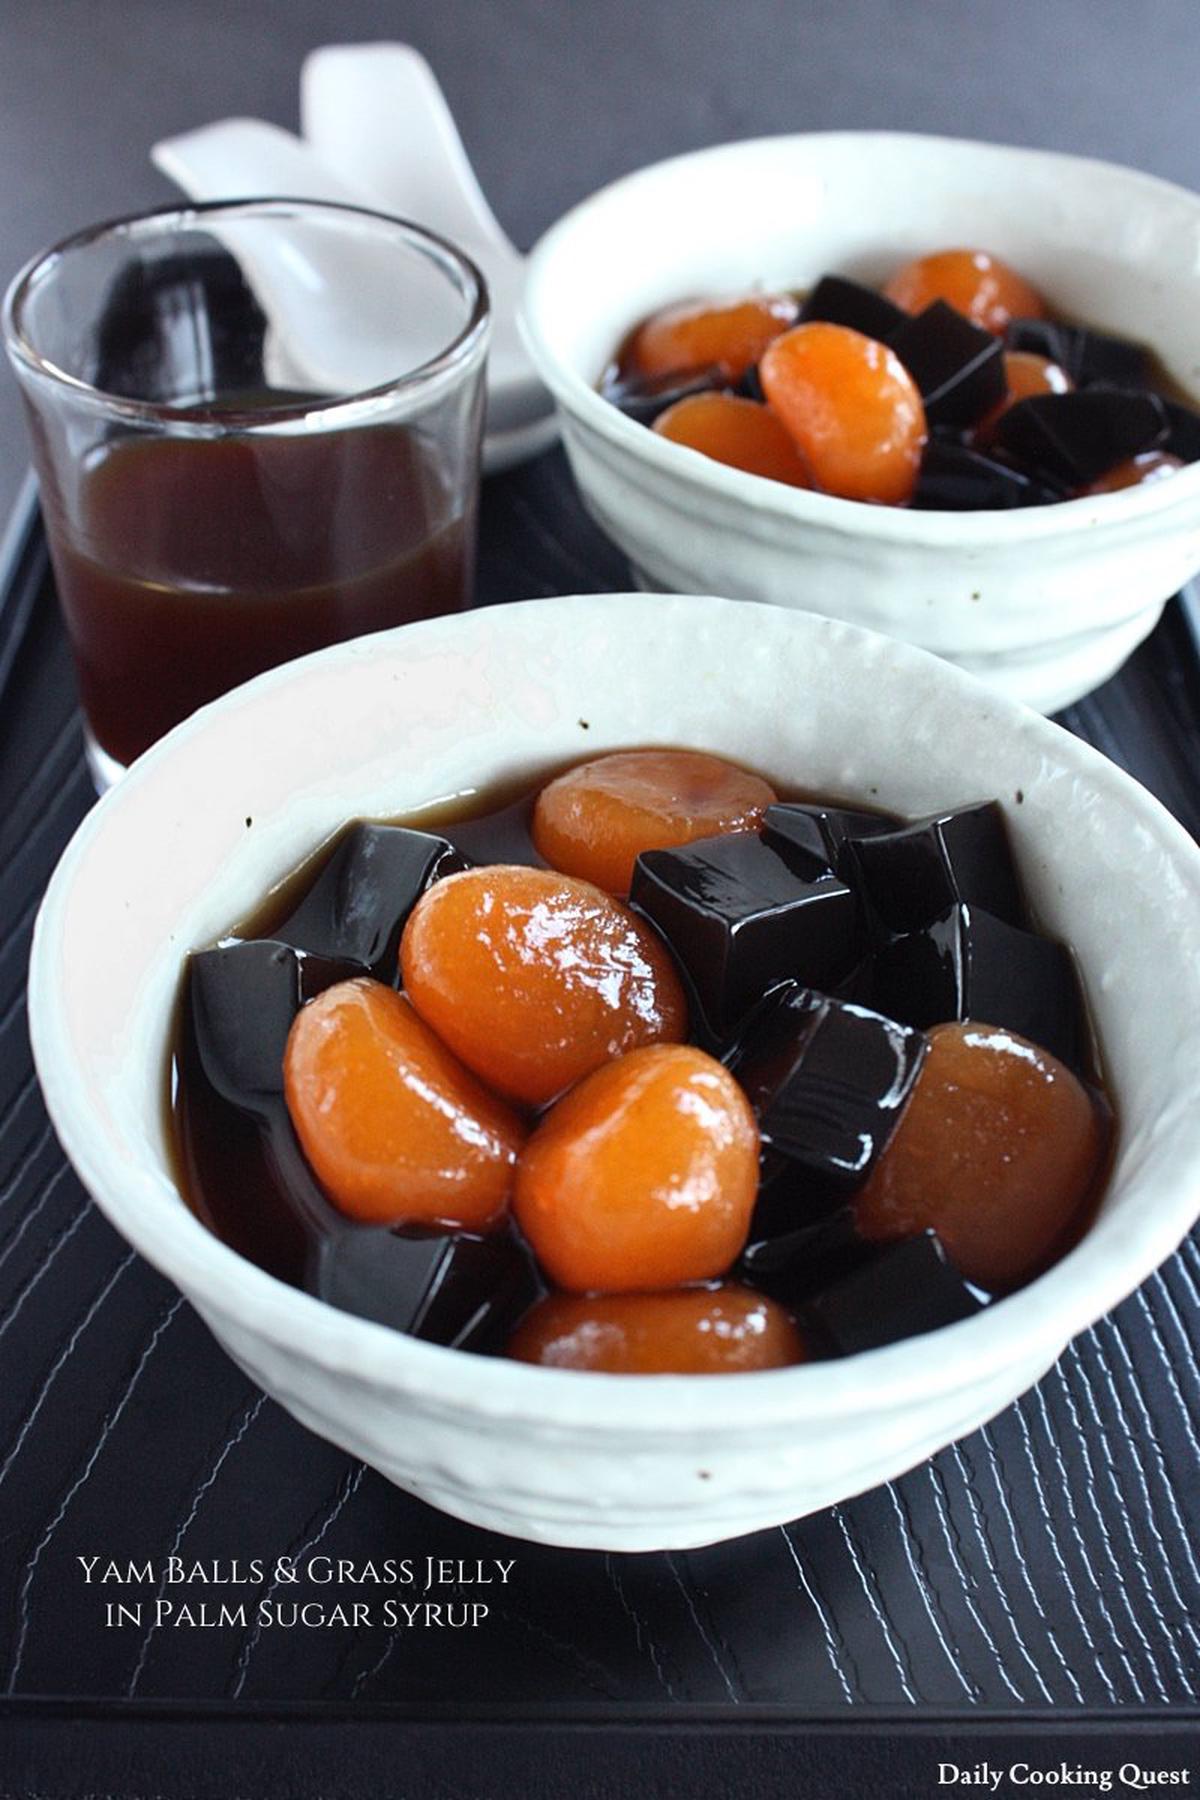 Yam Balls and Grass Jelly in Palm Sugar Syrup